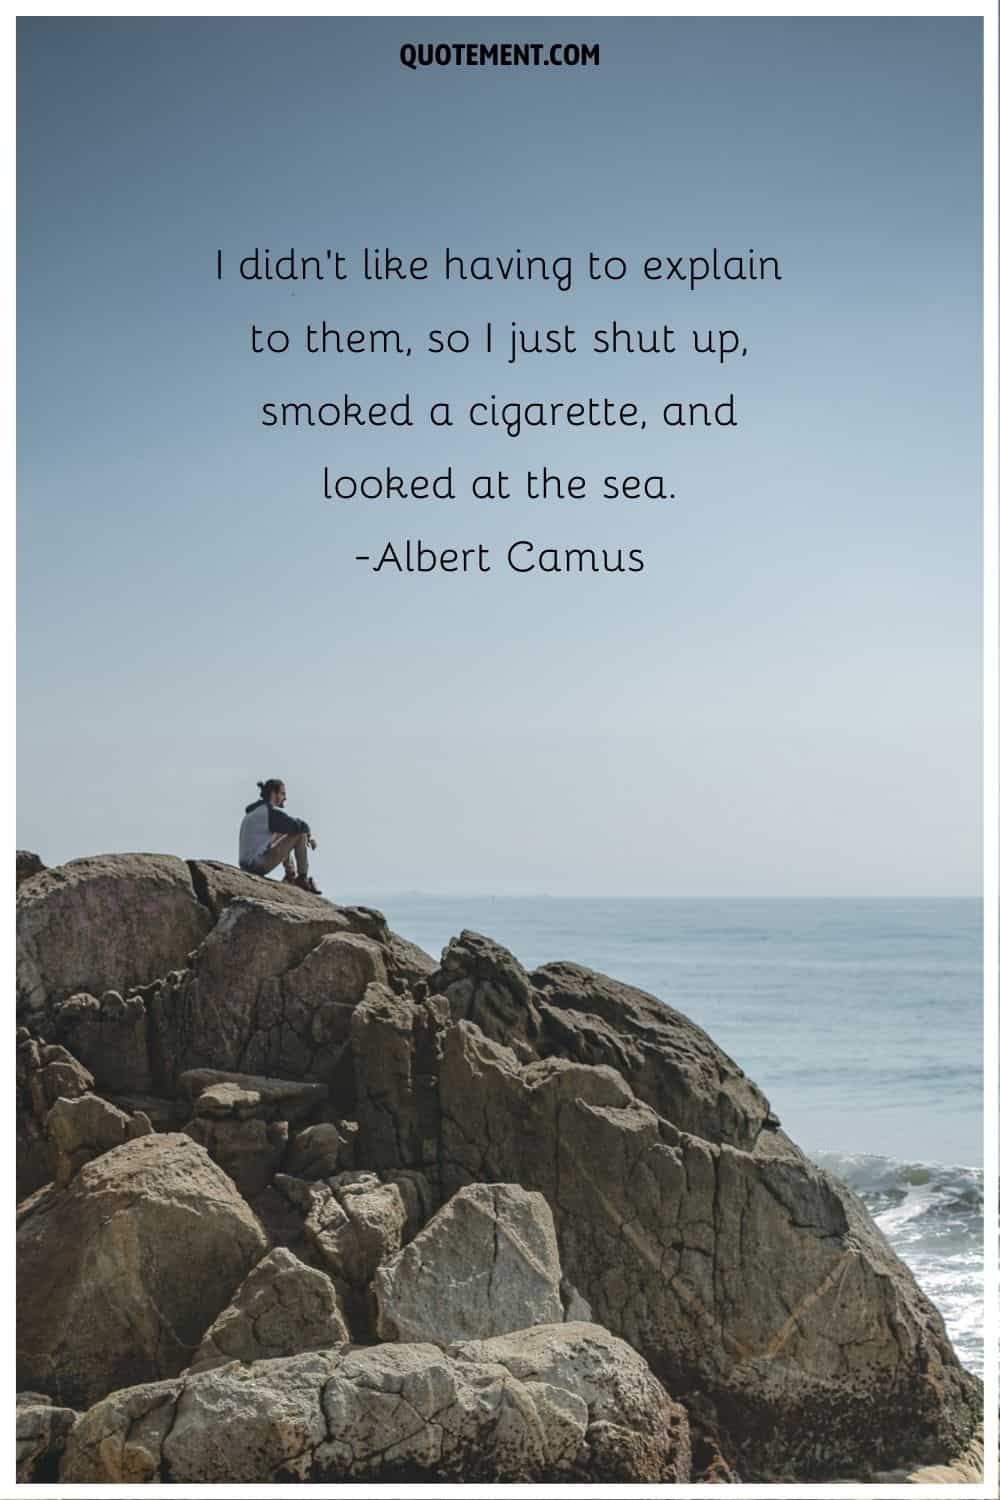 “I didn’t like having to explain to them, so I just shut up, smoked a cigarette, and looked at the sea.” ― Albert Camus, The Stranger